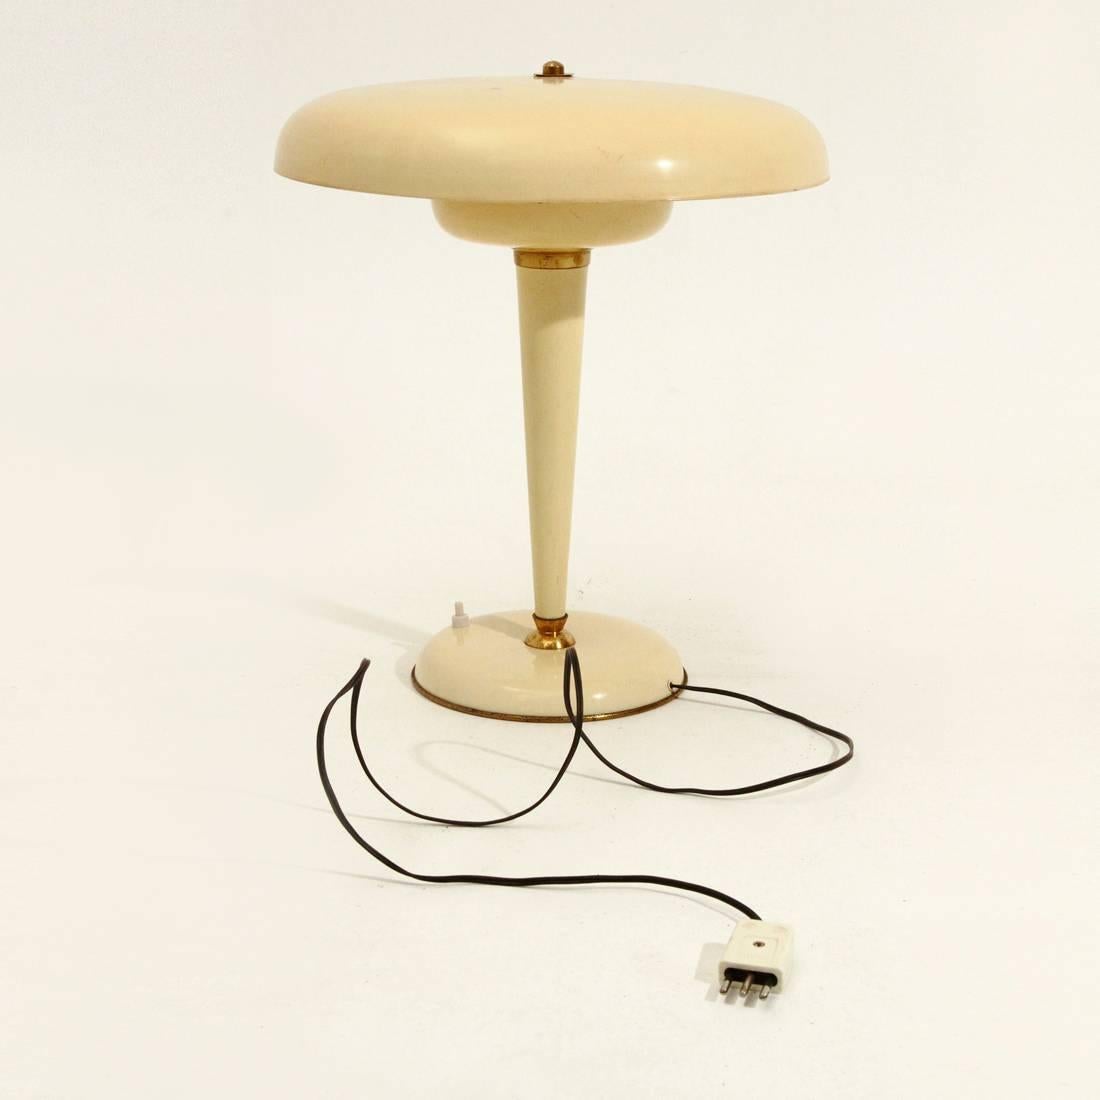 This table lamp from the 1940s is made from cream-lacquered sheet metal with brass details.